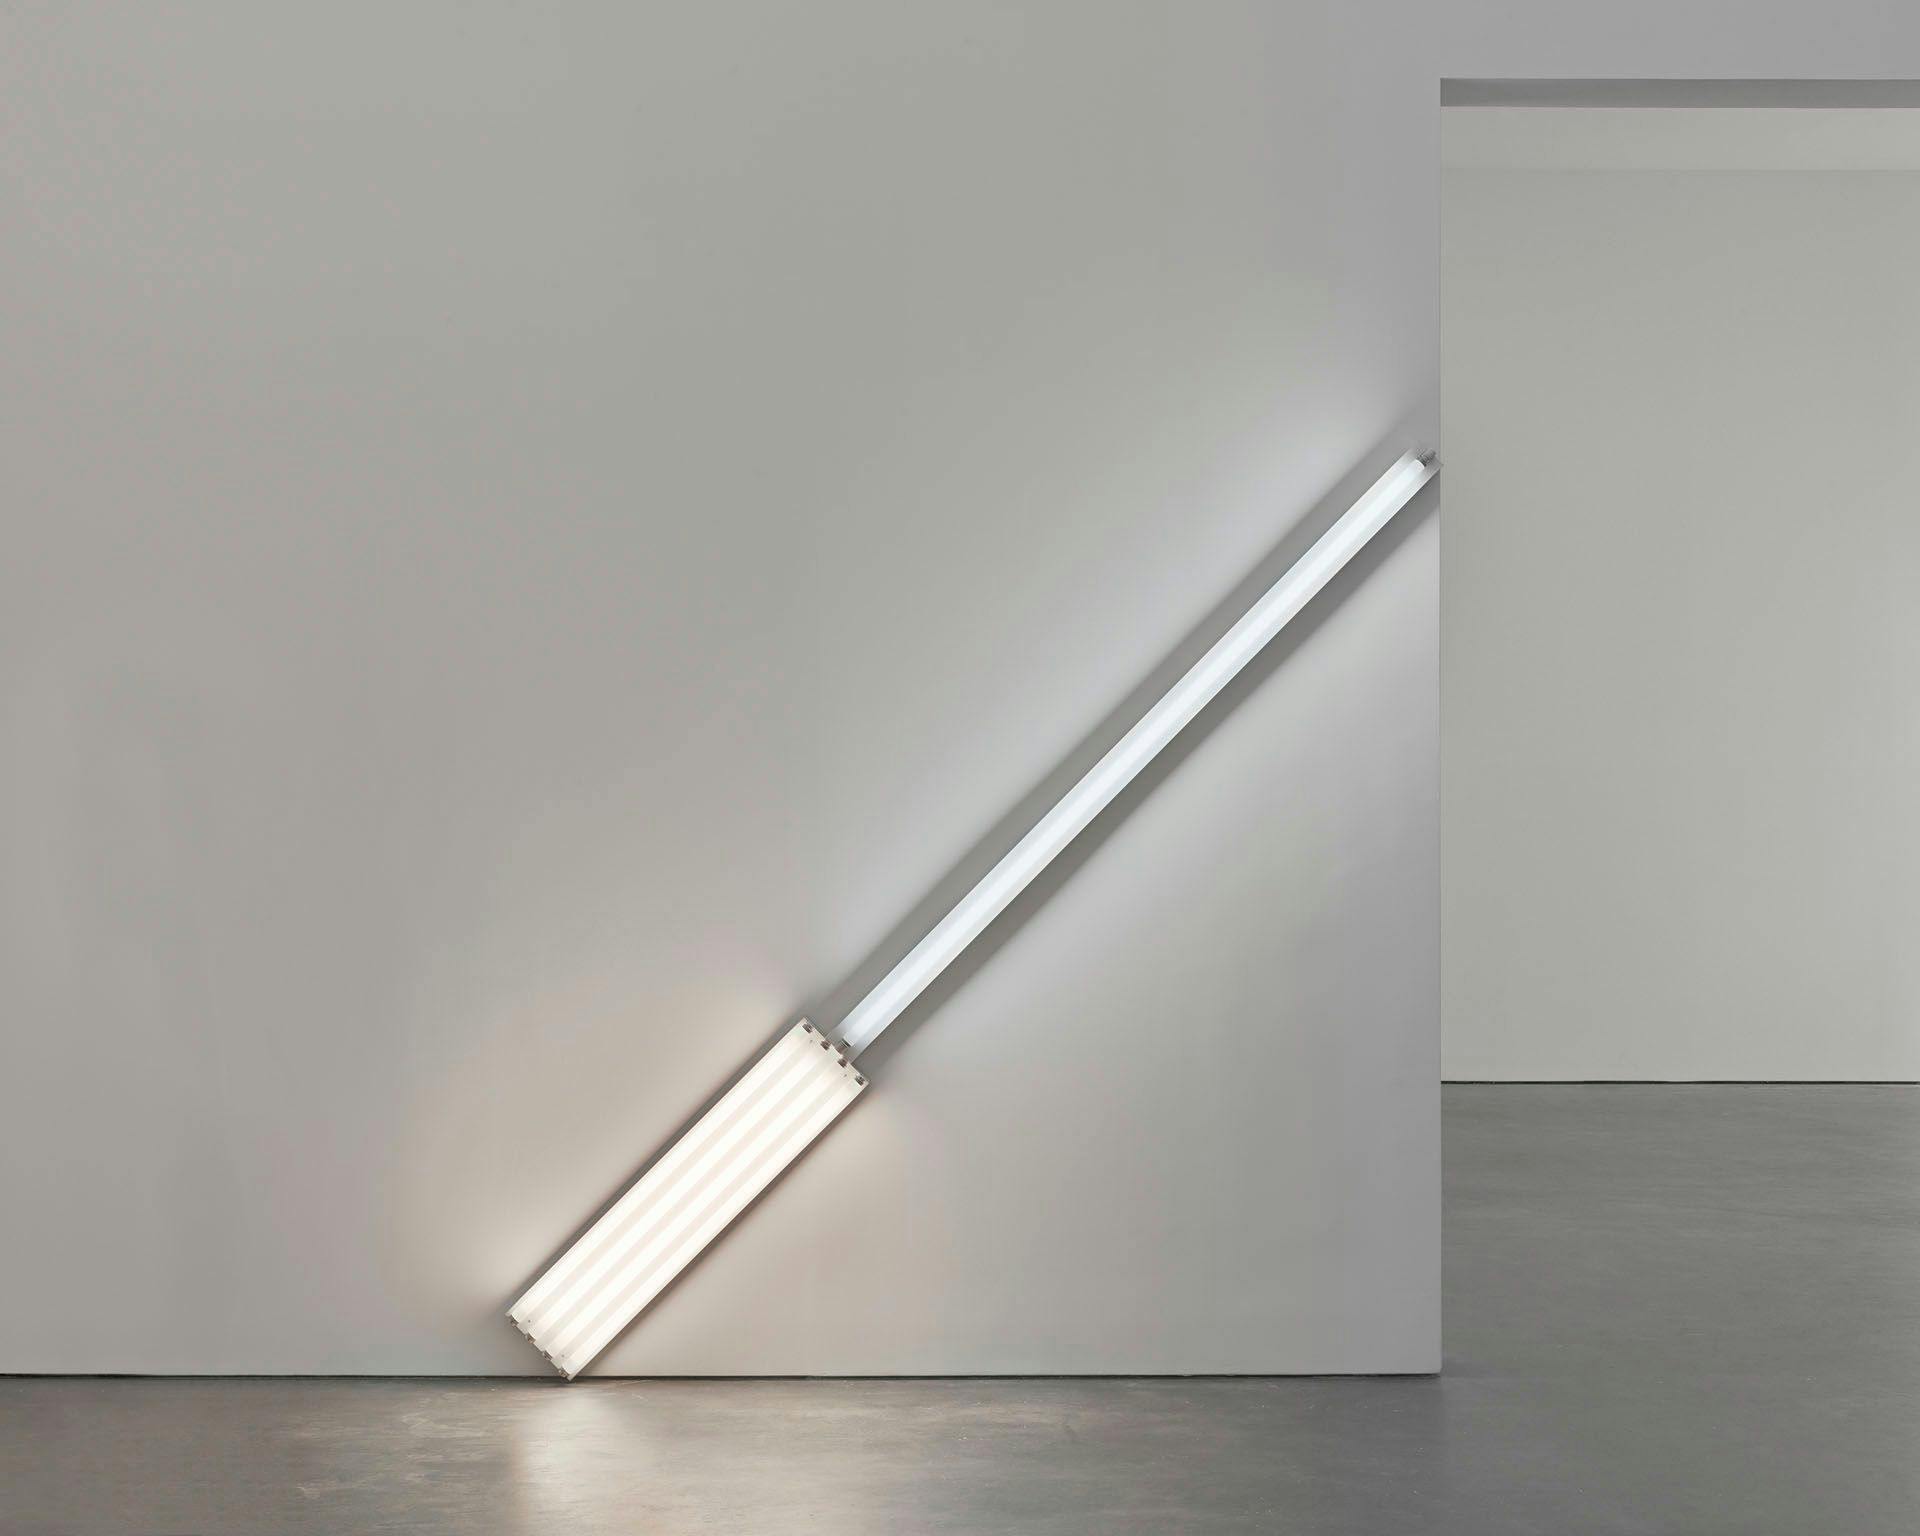 A sculpture in daylight and cool white fluorescent light by Dan Flavin, titled alternate diagonals of March 2, 1964 (to Don Judd), dated 1964.